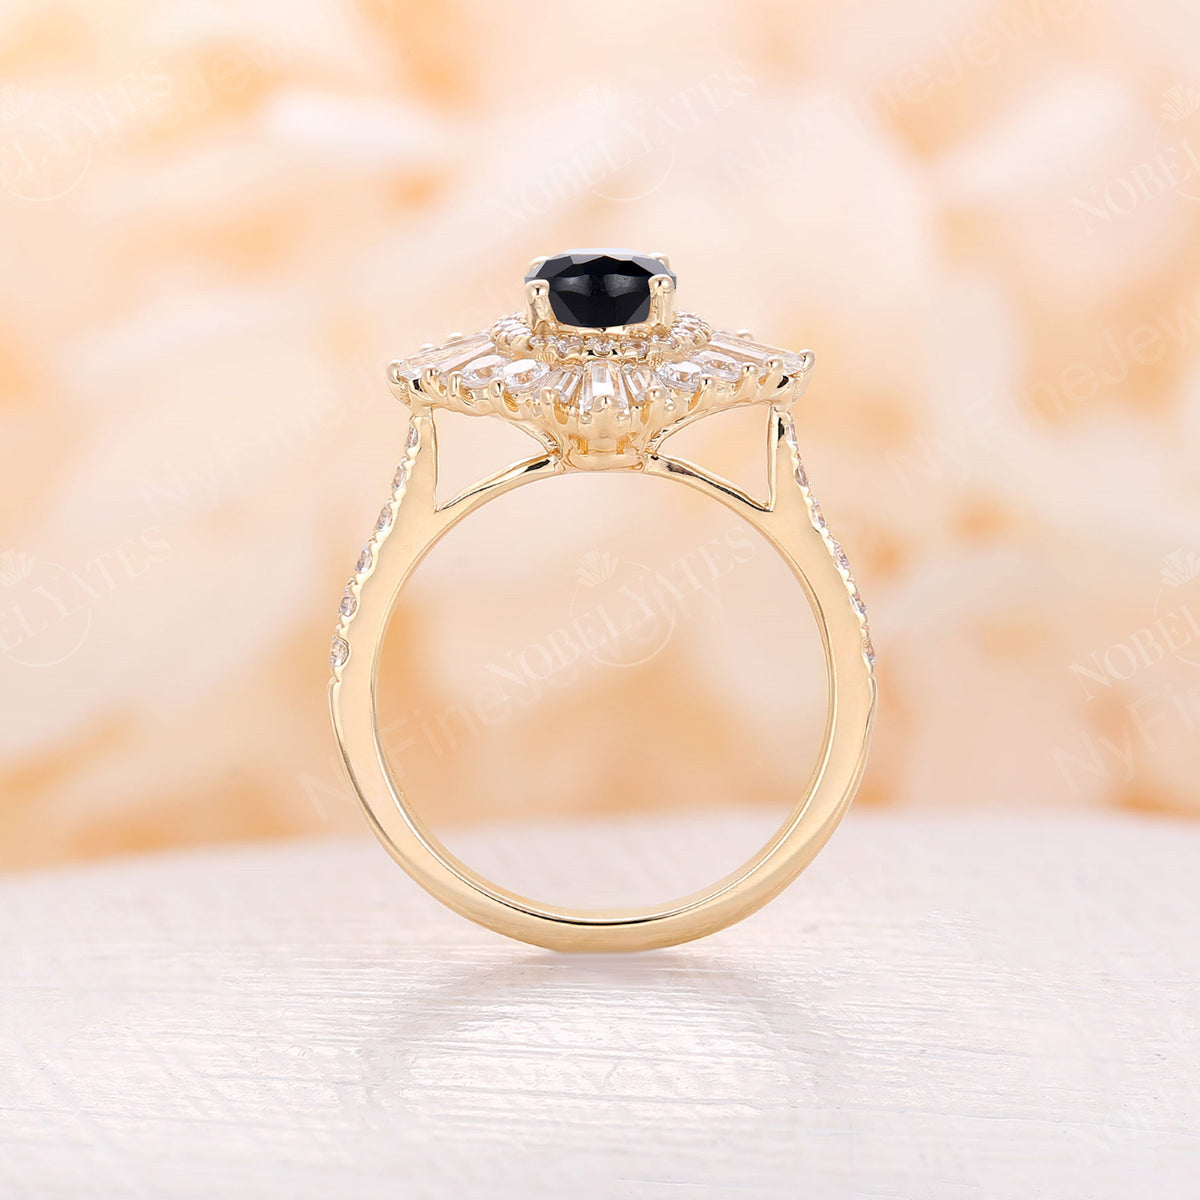 Art deco Oval Black Onyx Halo Pave Engagement Ring Yellow Gold